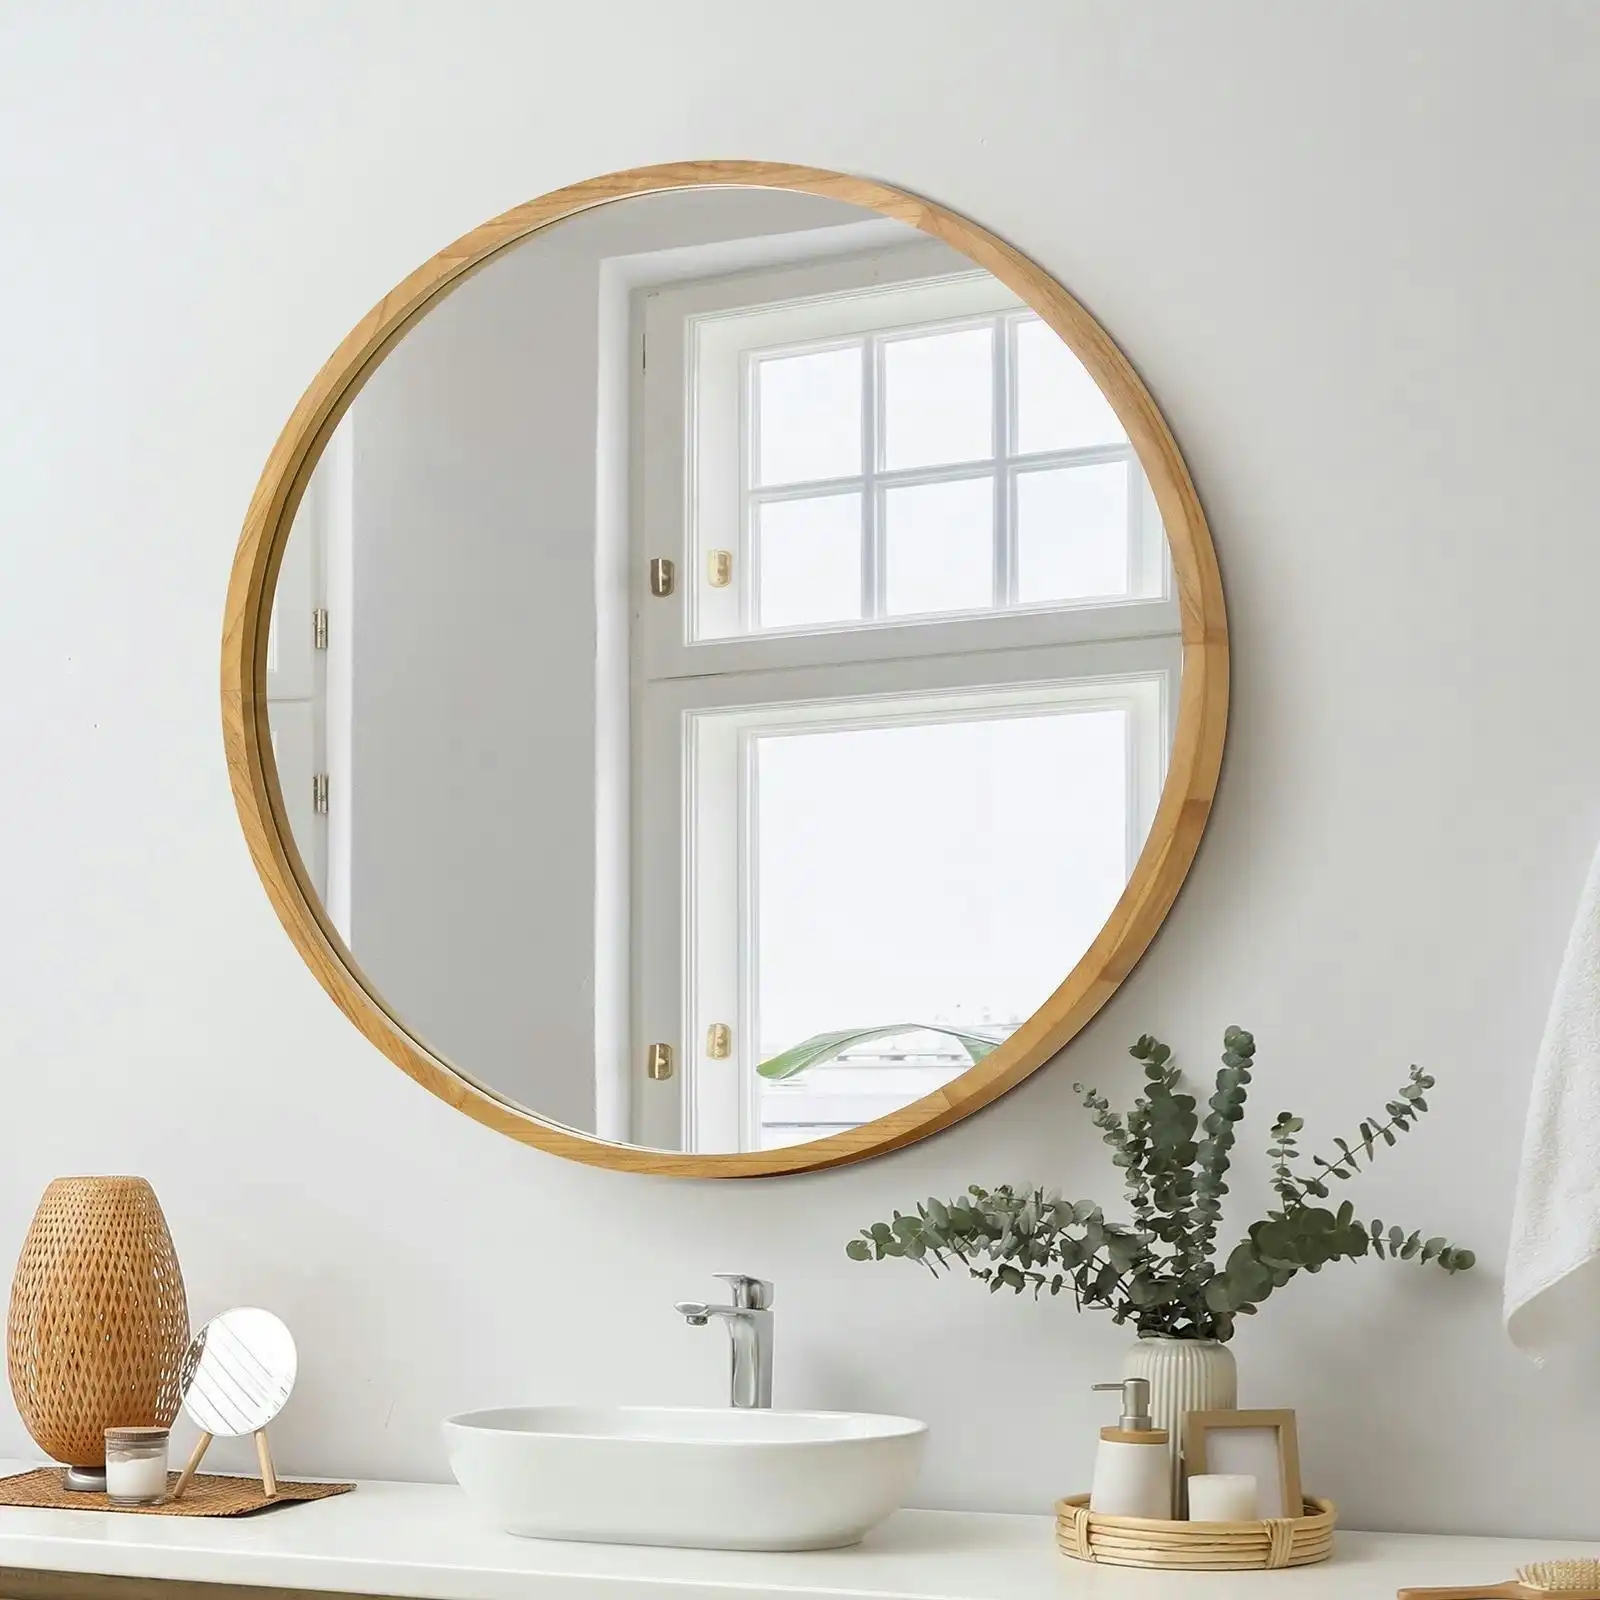 Oikiture Wall Mirrors Round 70cm Makeup Mirror Vanity Home Decro Wooden